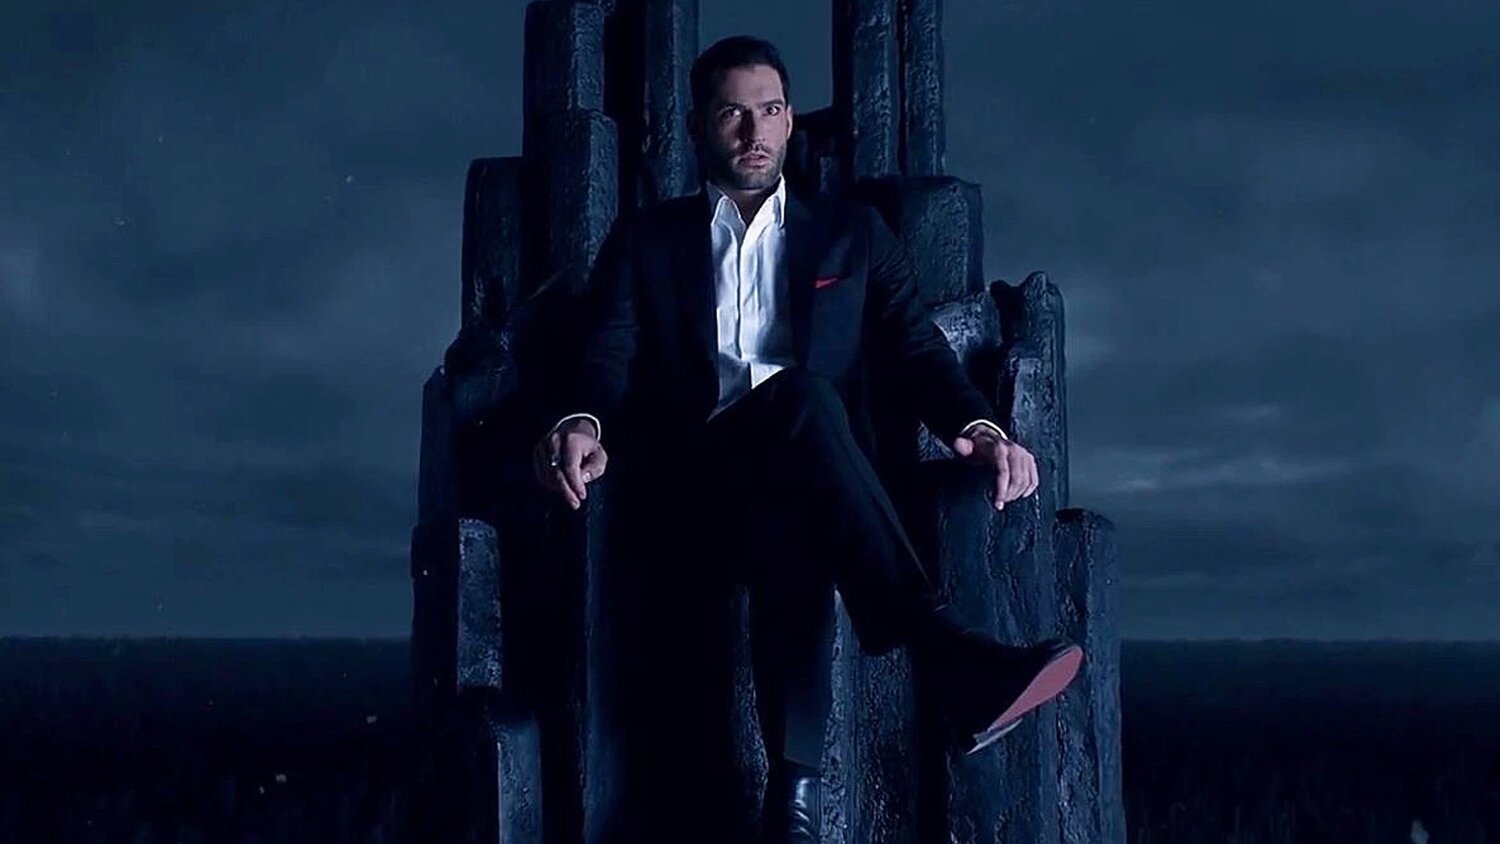 Fans have been waiting since May 2019 to see 'Lucifer' return to Netflix with its long-awaited fifth season. Here's what we know about its return.